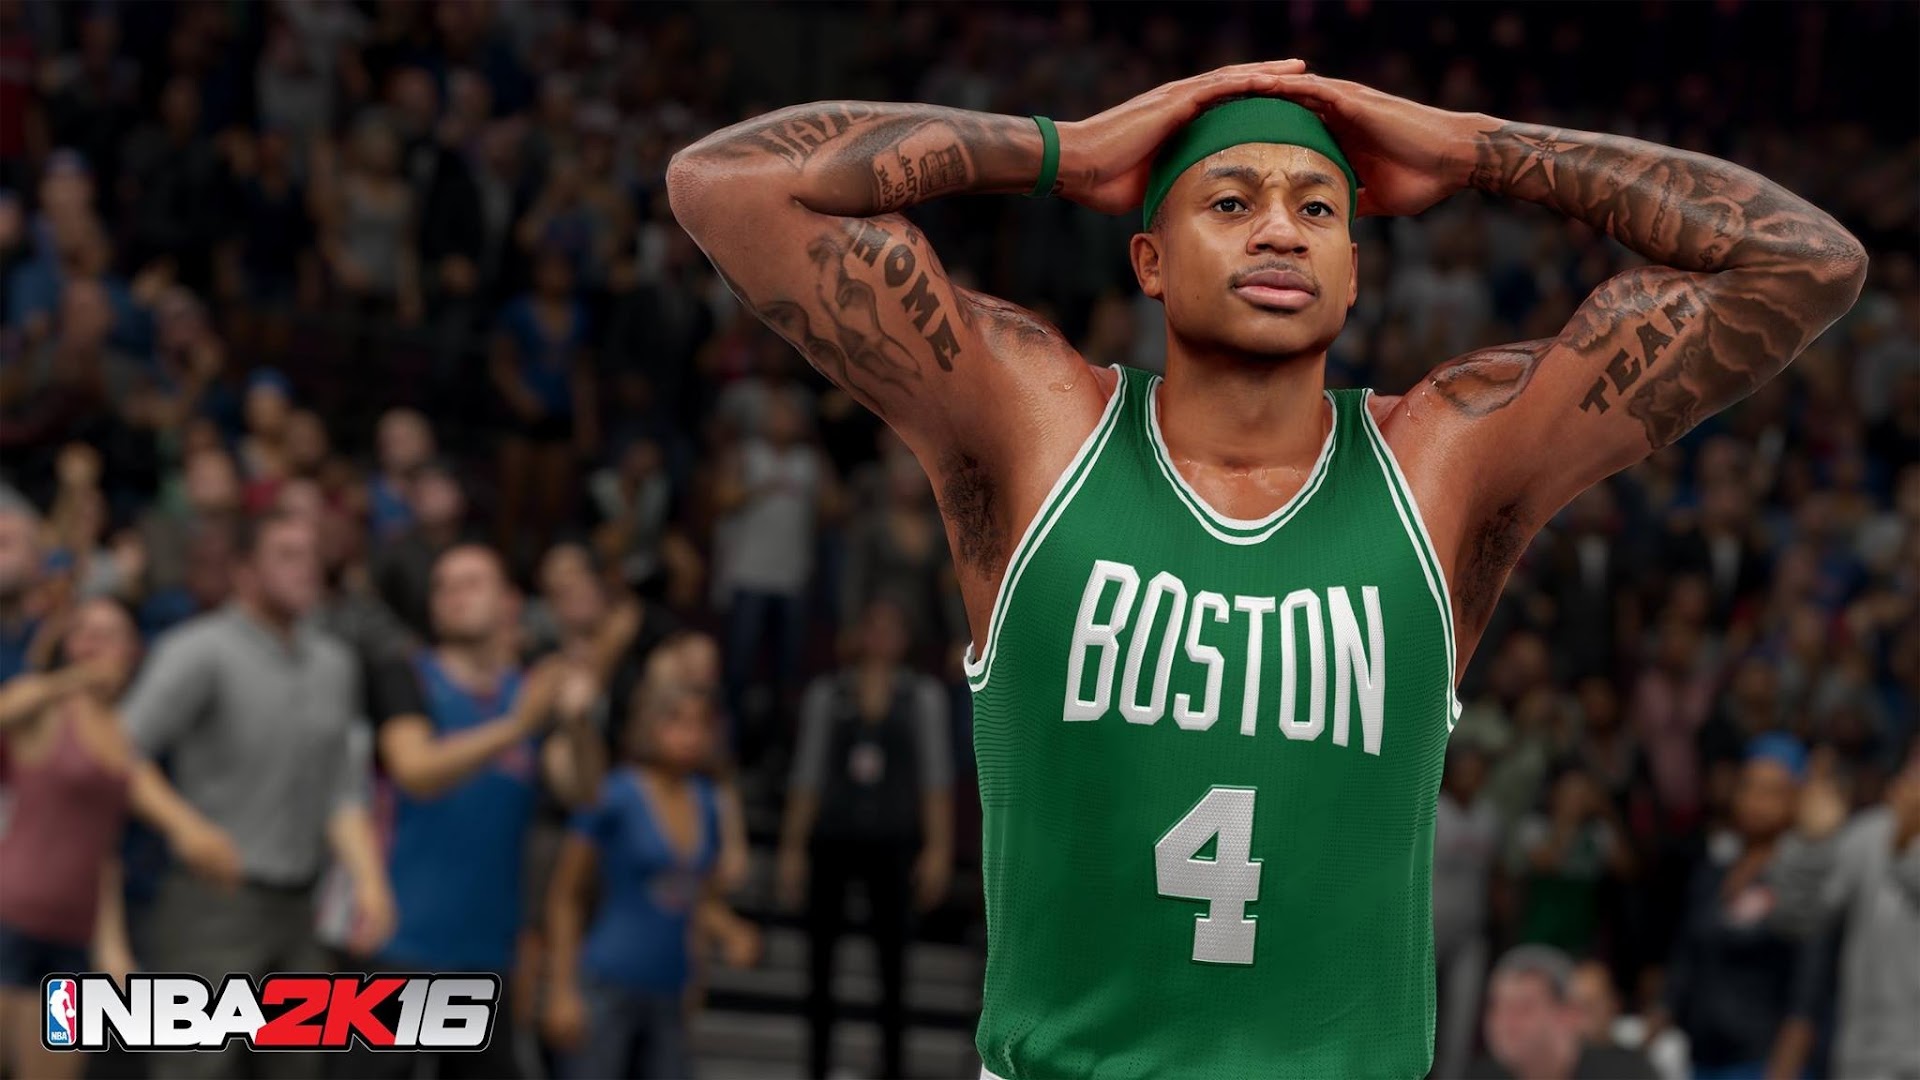 Get a Better Look at NBA 2K16 with These High-Res Screenshots - NBA2K.ORG1920 x 1080